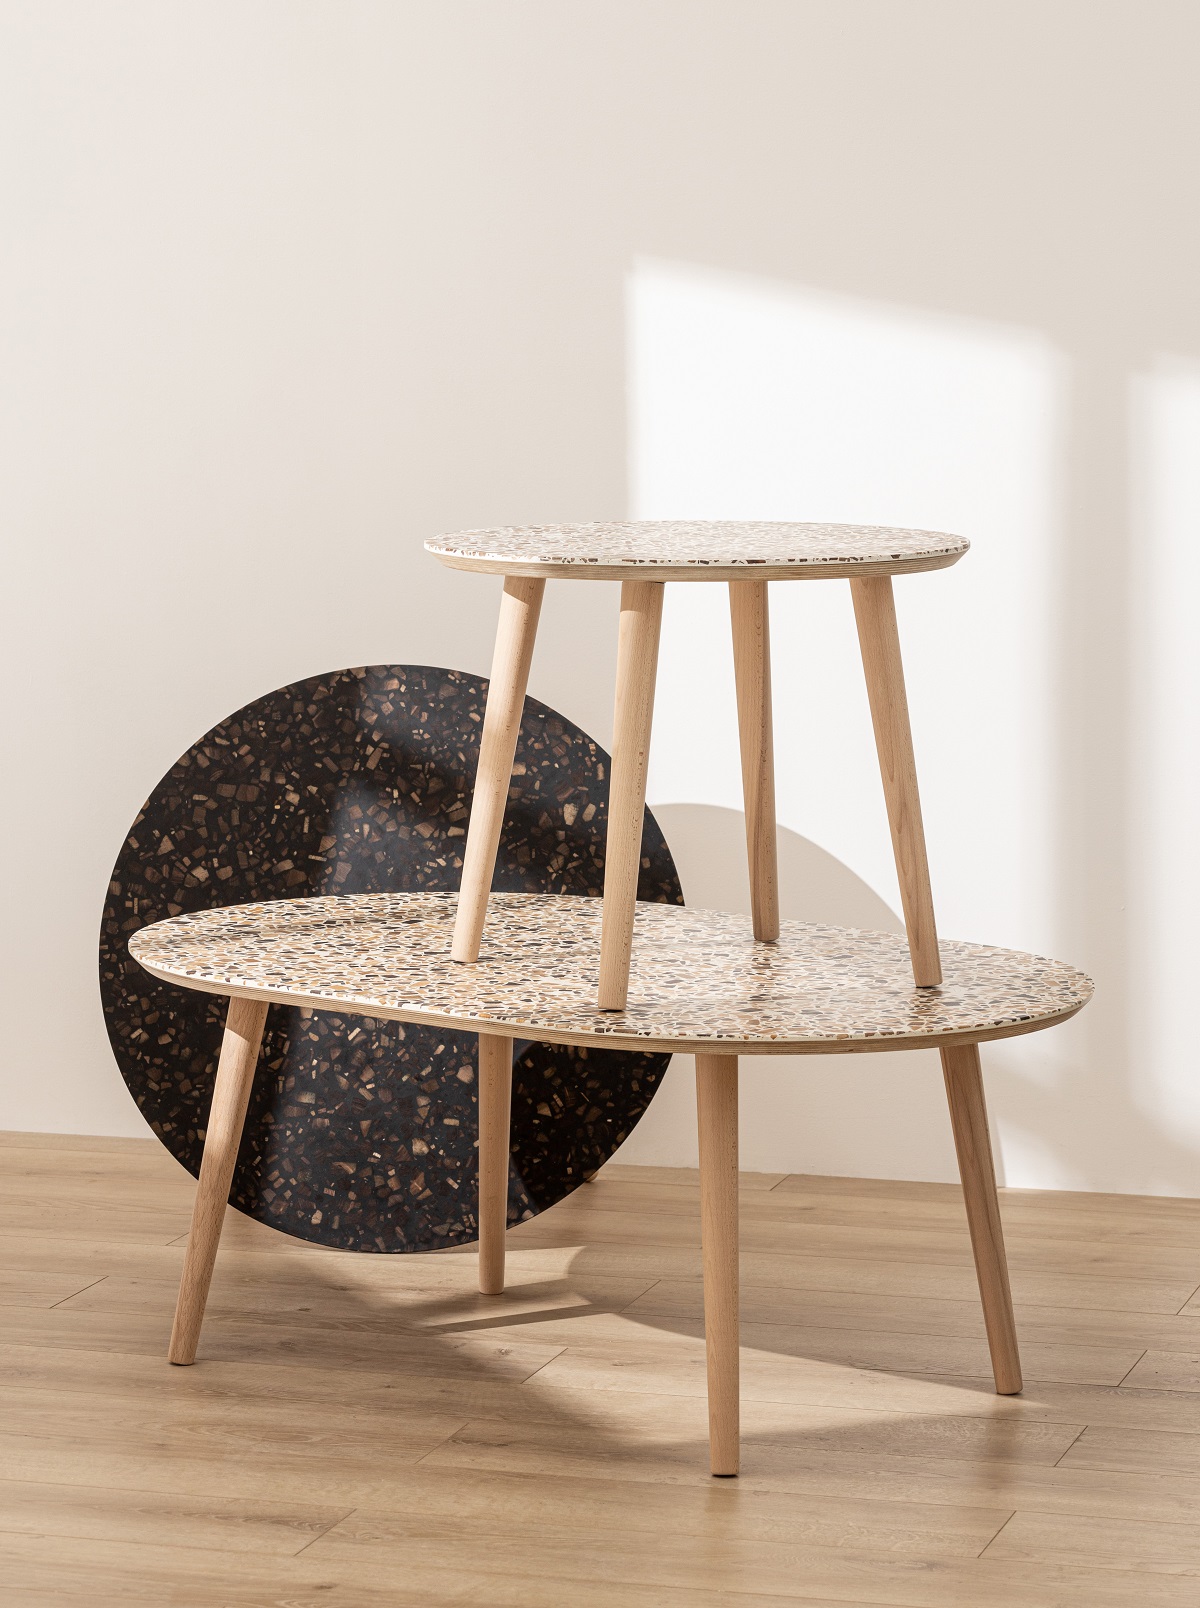 a collection of three tables with Foresso wood terrazzo surface design detail